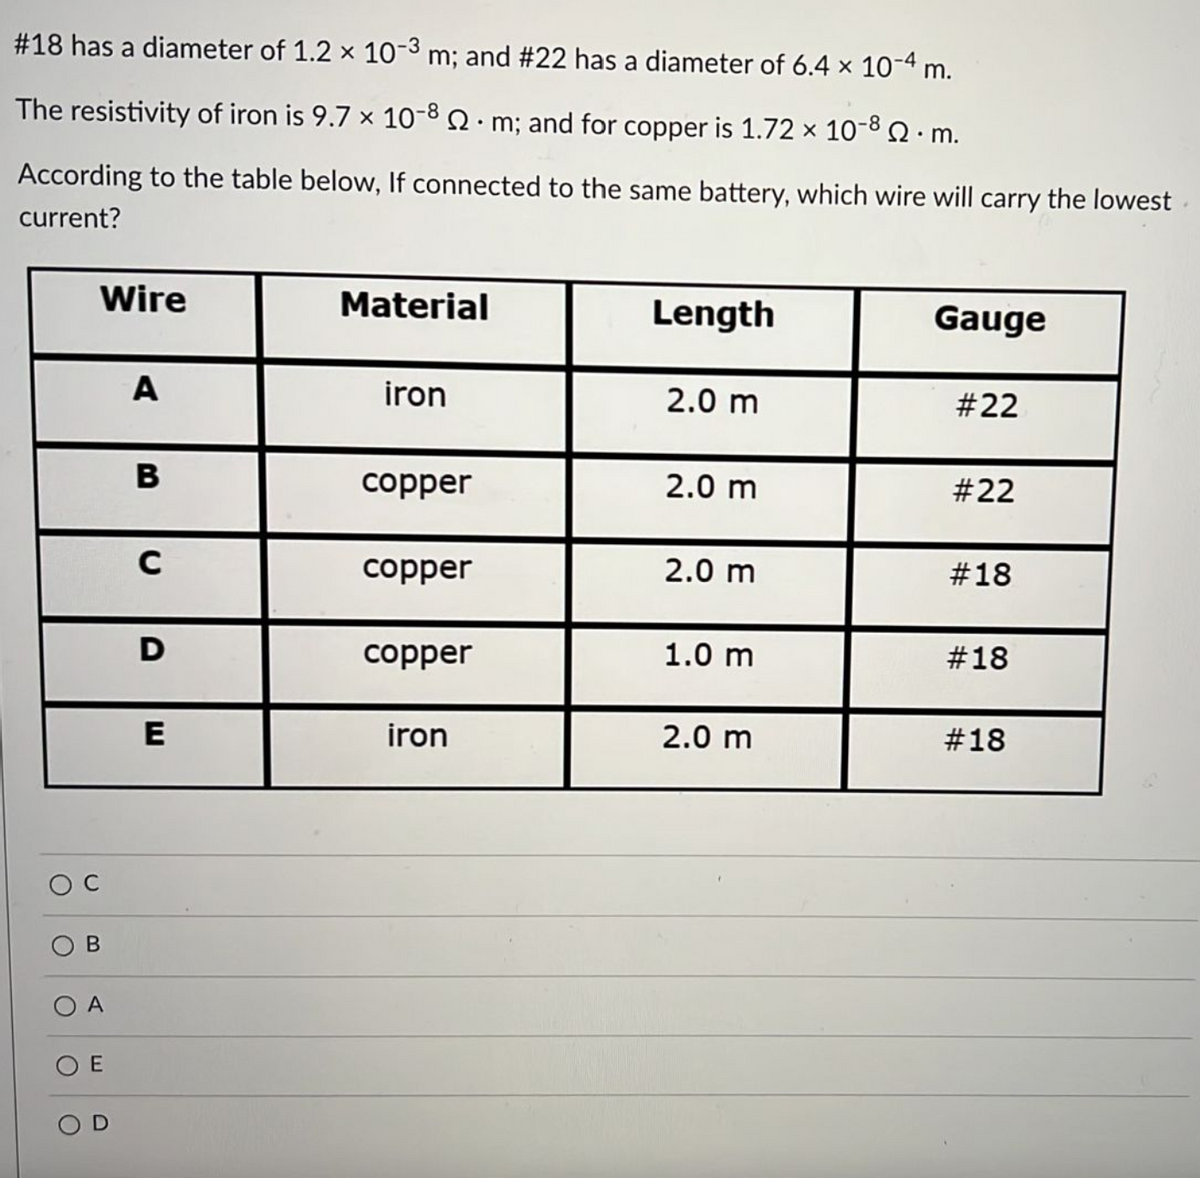 #18 has a diameter of 1.2 x 10-3 m; and #22 has a diameter of 6.4 x 10-4 m.
The resistivity of iron is 9.7 x 10-8.m; and for copper is 1.72 x 10-8Q. m.
According to the table below, If connected to the same battery, which wire will carry the lowest
current?
Wire
Material
Length
Gauge
A
iron
2.0 m
#22
copper
2.0 m
#22
C
copper
2.0 m
#18
D
copper
1.0 m
#18
E
iron
2.0 m
#18
O A
O E
